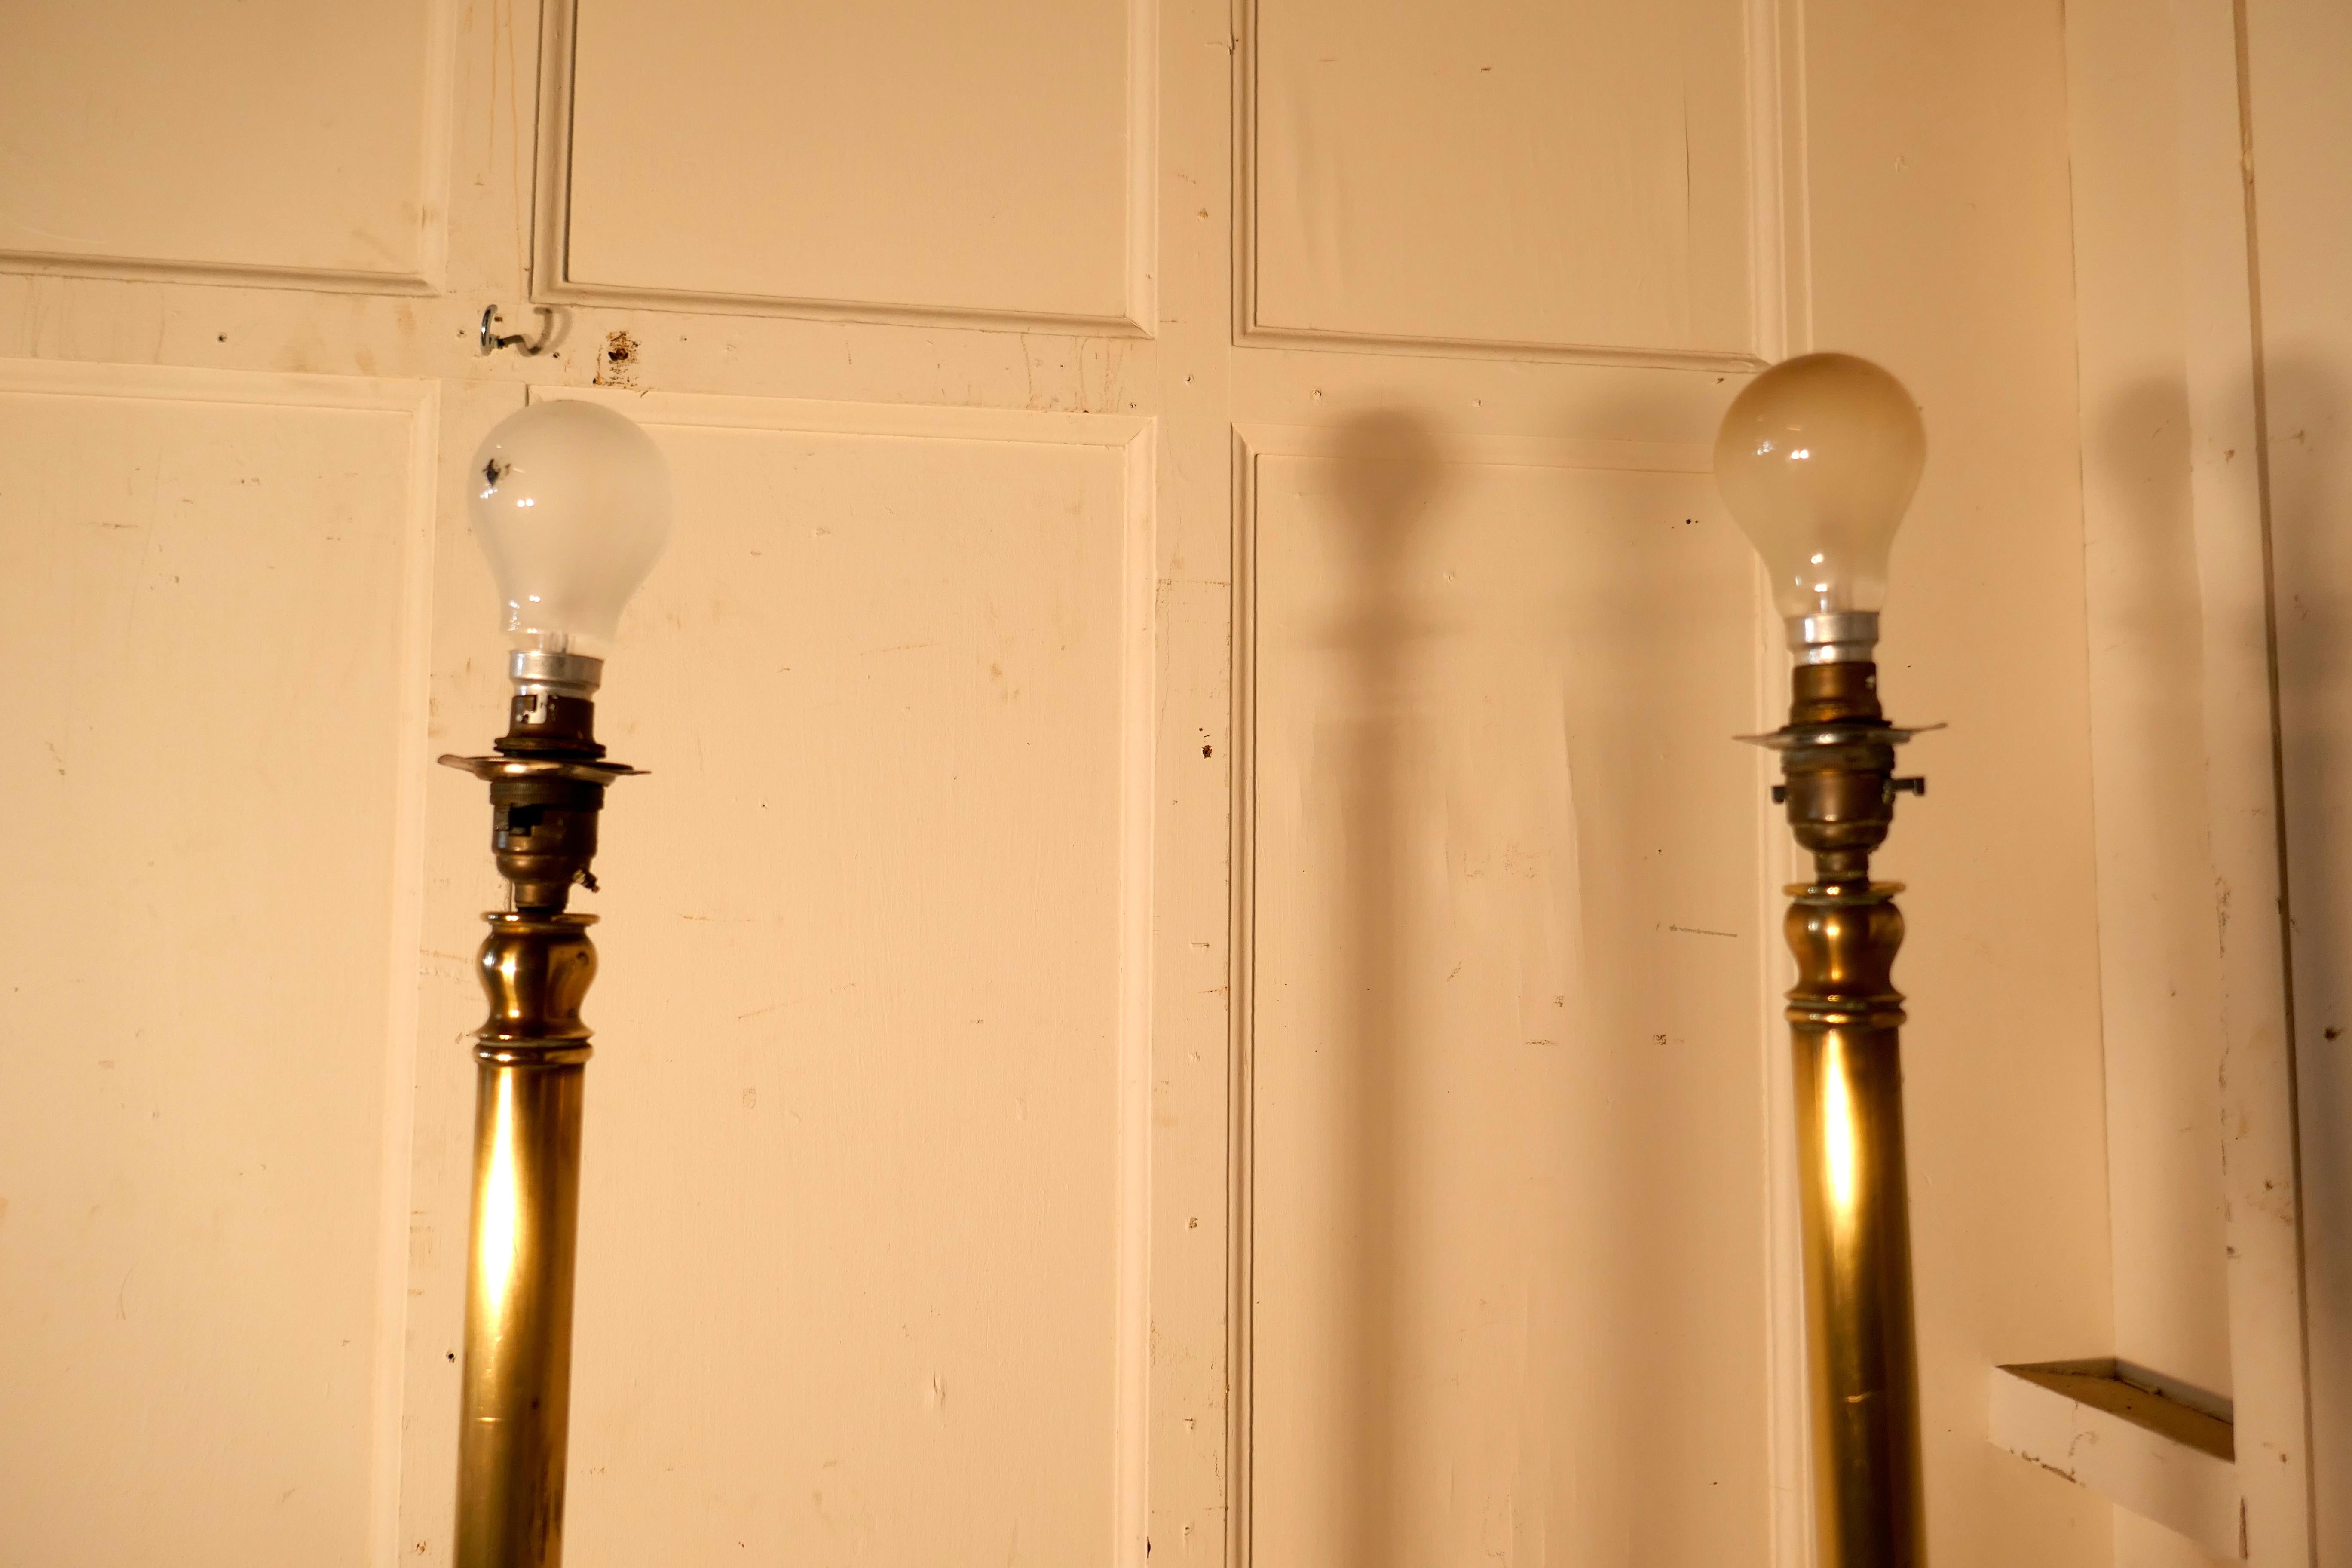 Pair of Tall Heavy Floor Lamps, Brass Arts & Crafts Standard Lamps (Arts and Crafts)